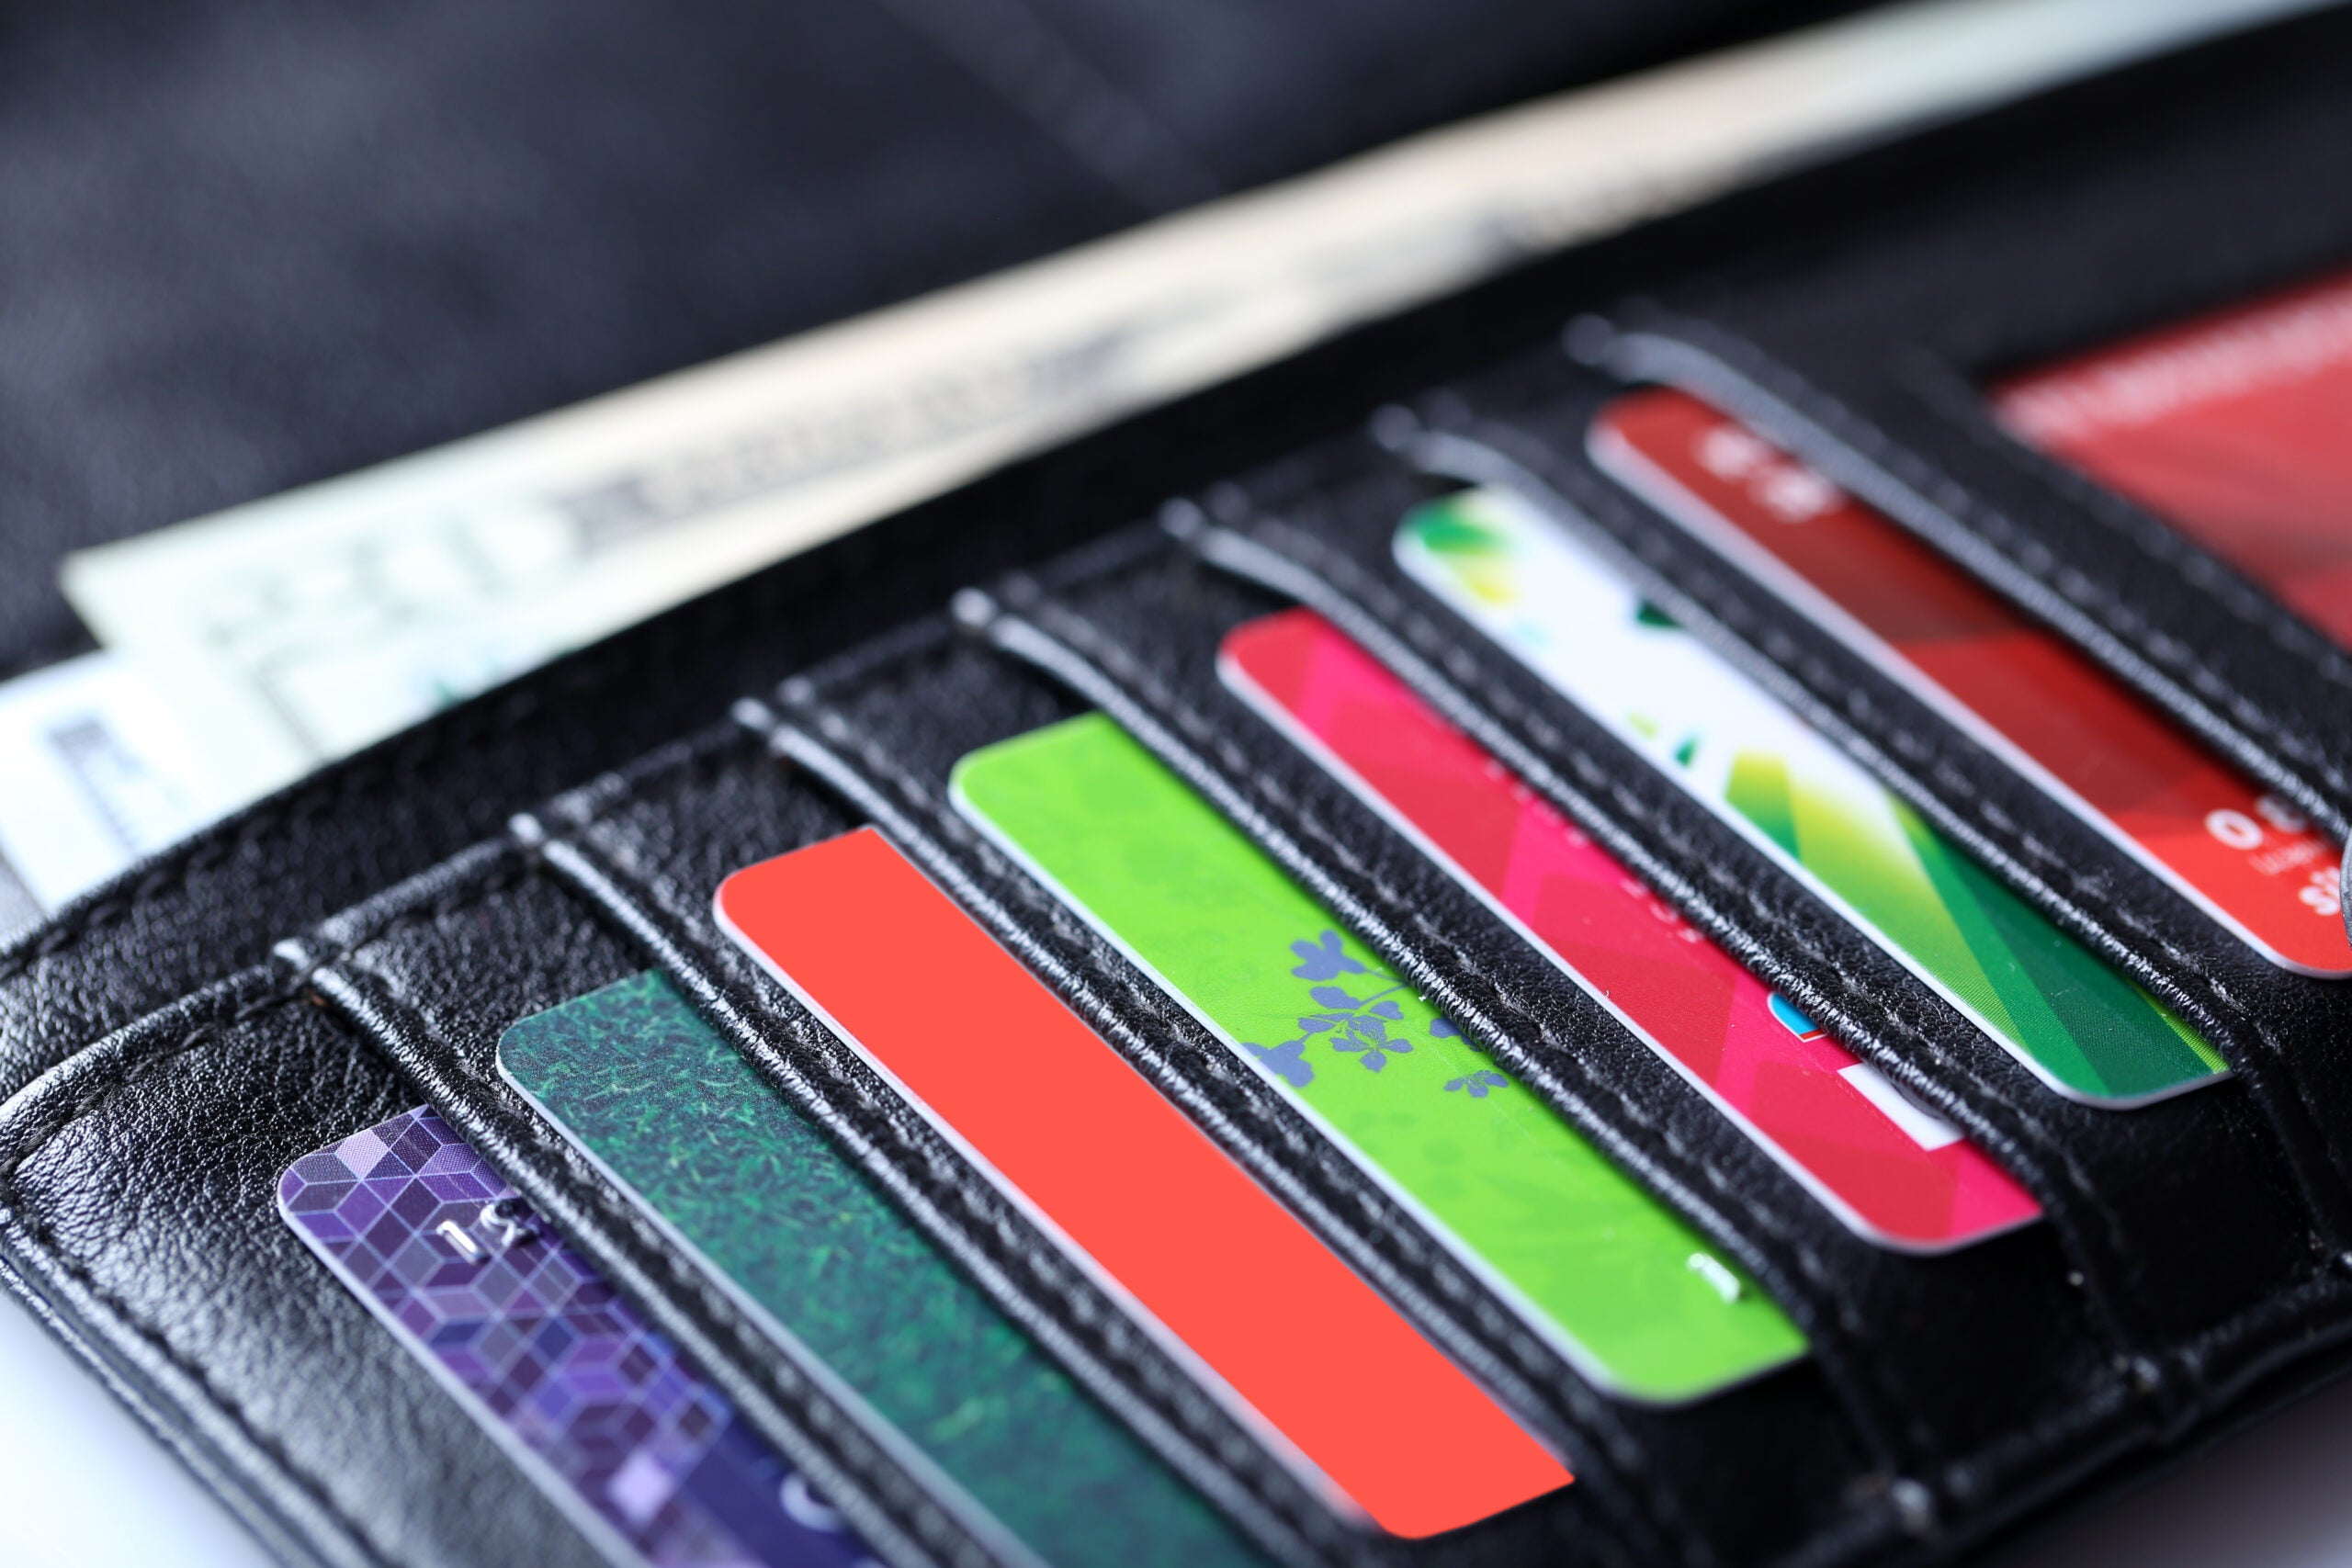 a generic image of credit cards lined up in a black leather billfold